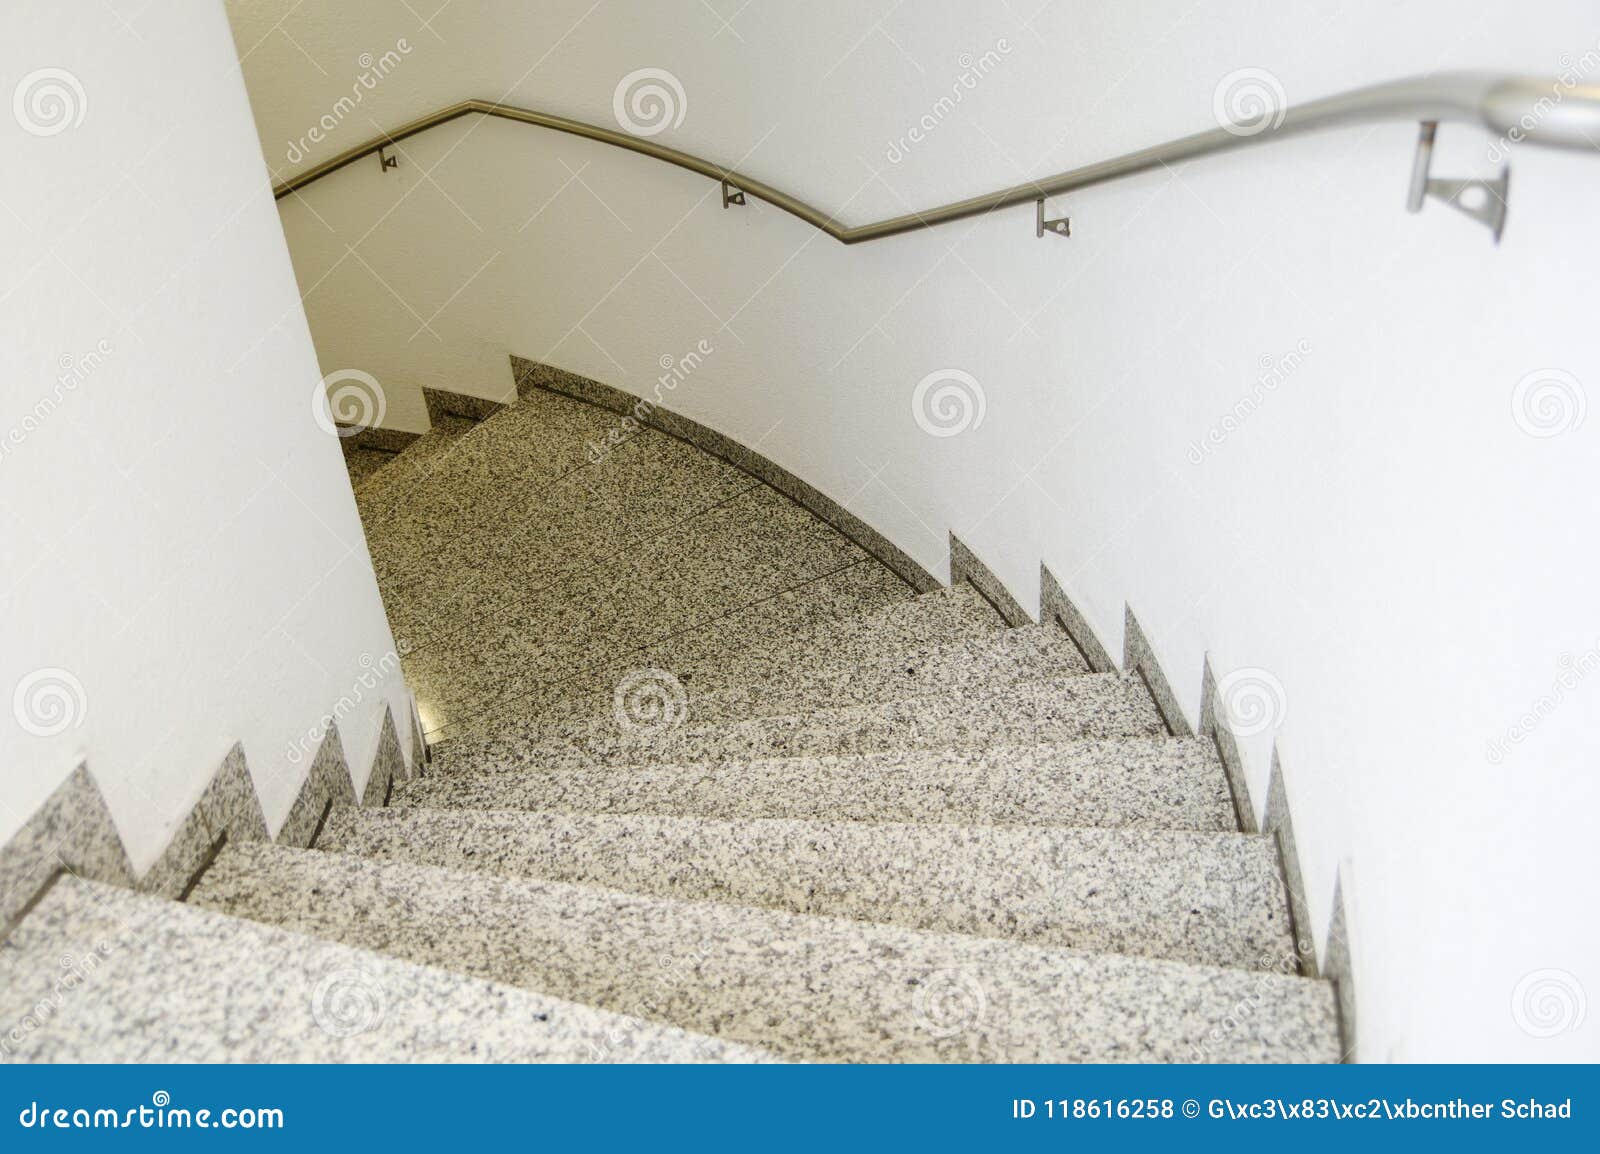 Staircase With Natural Stone And Stainless Steel Railing